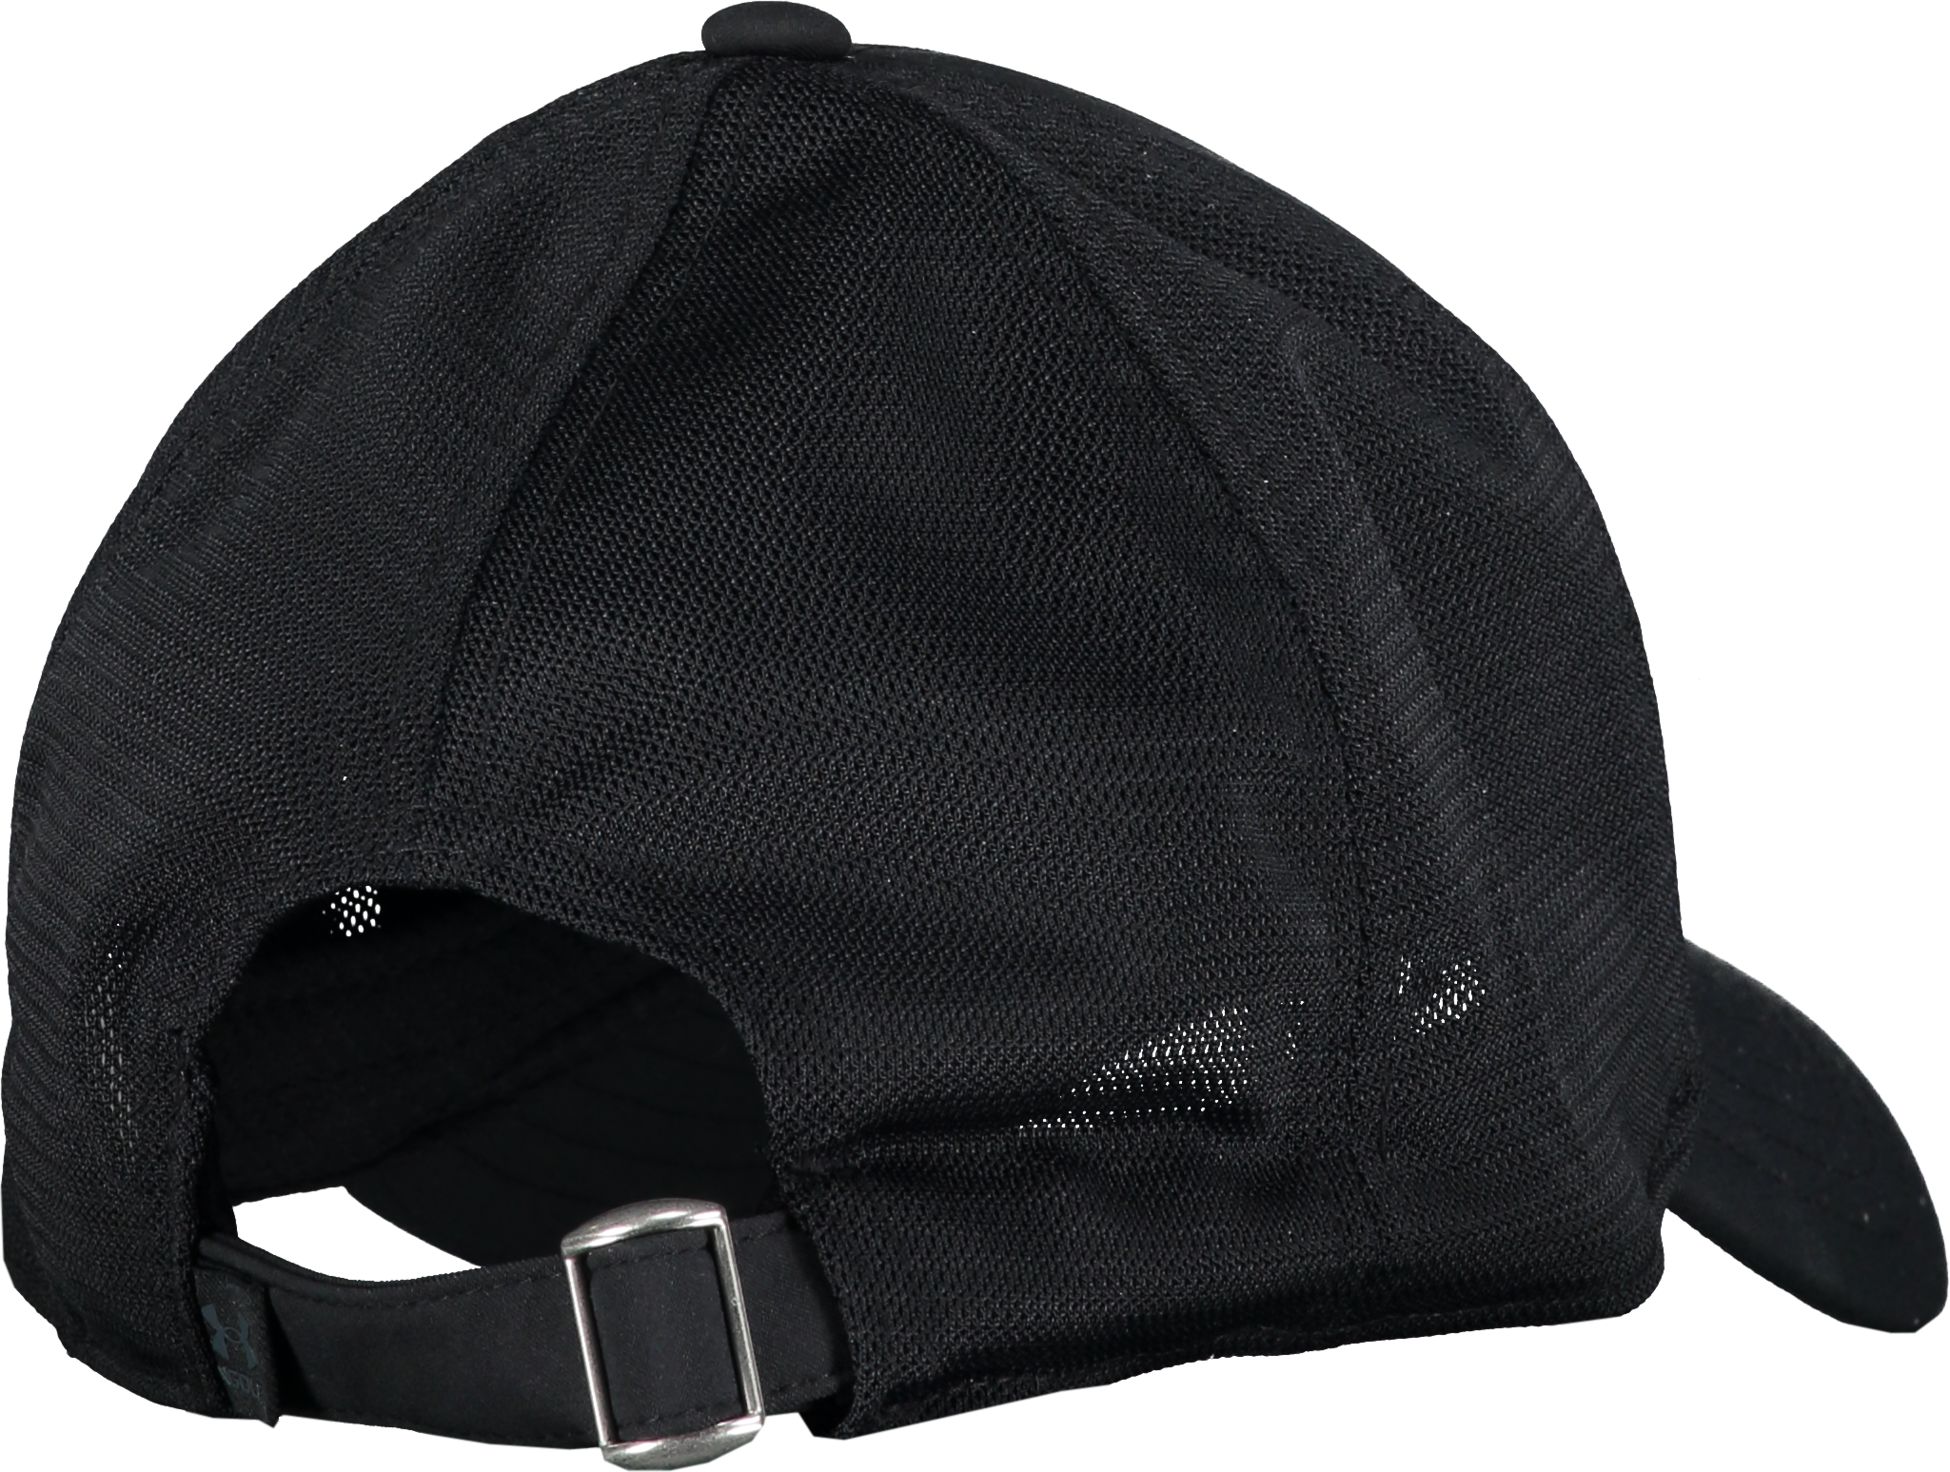 UNDER ARMOUR, ISO-CHILL DRIVER MESH CAP